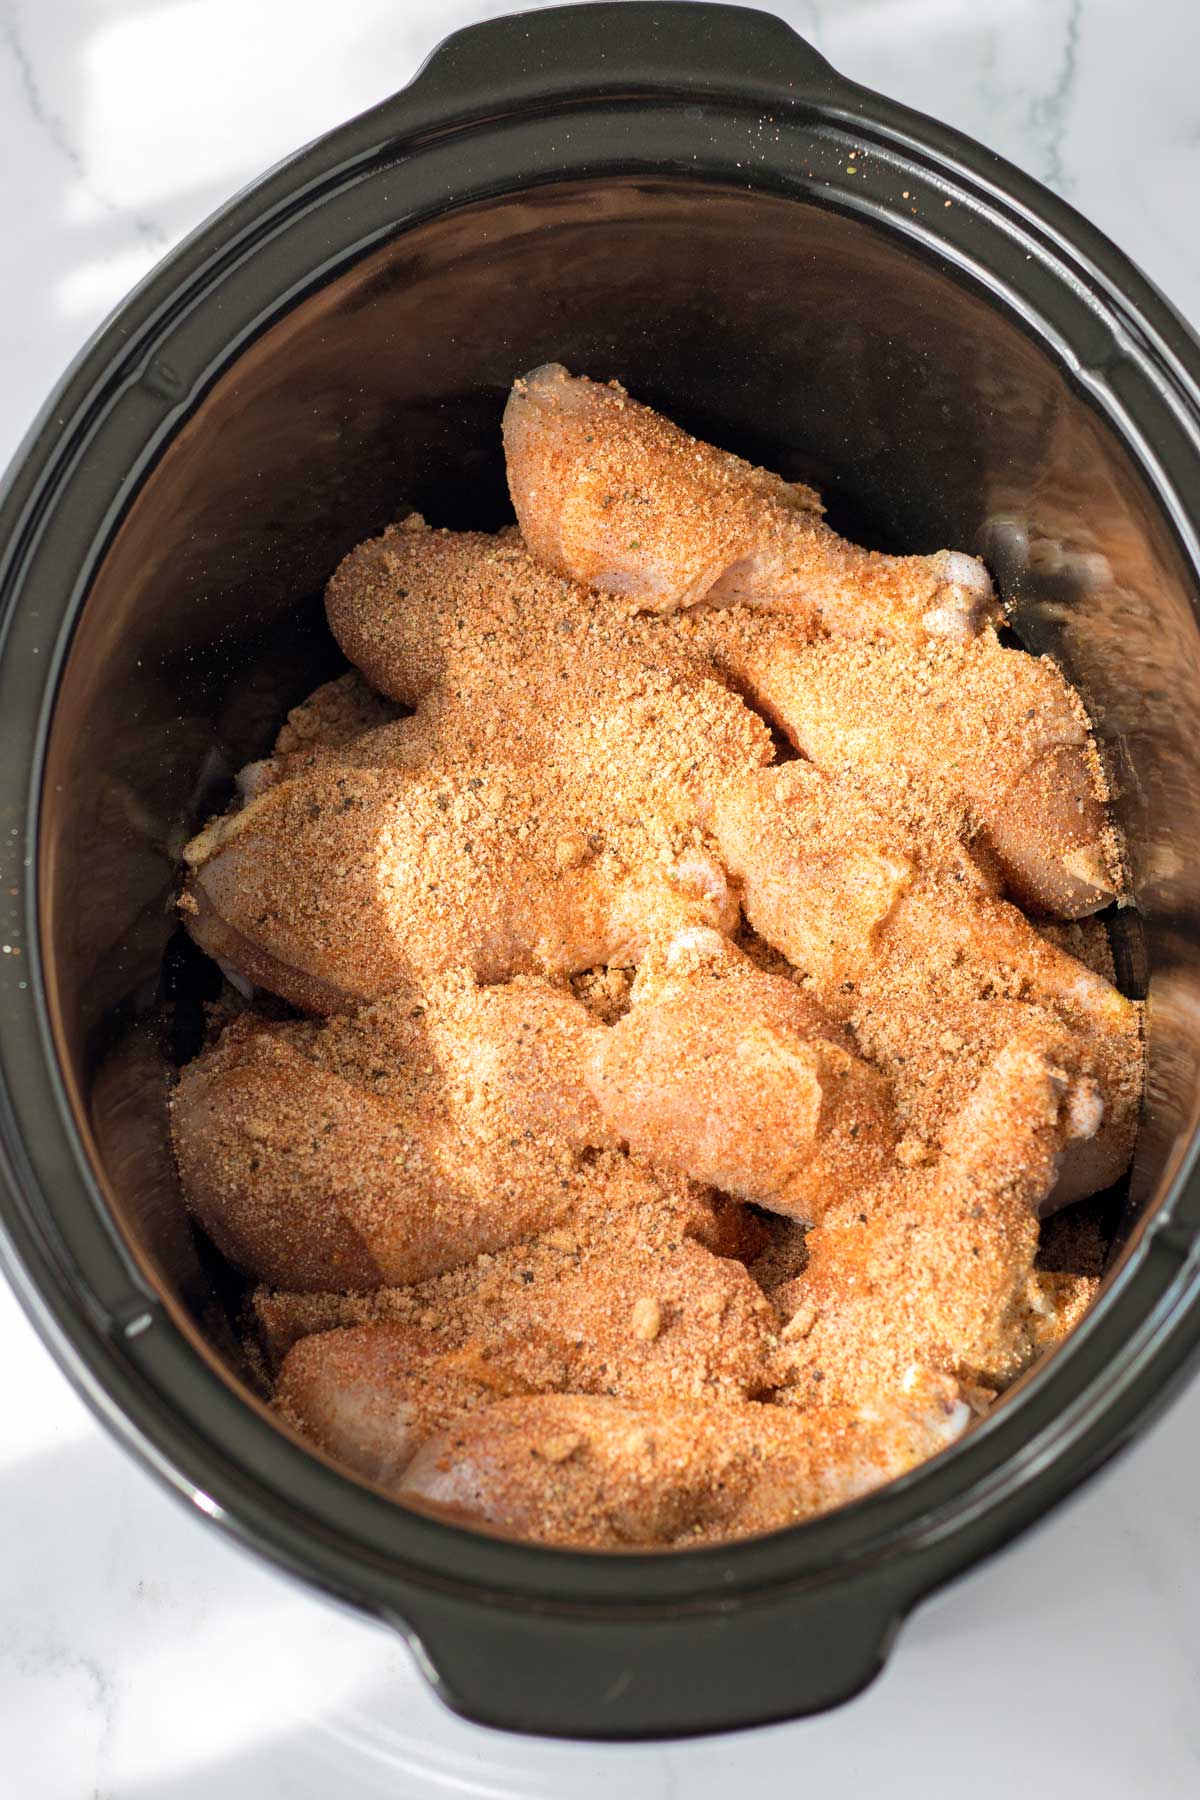 First process in preparing Crockpot BBQ Drumsticks is to add the seasoning mix to the chicken.